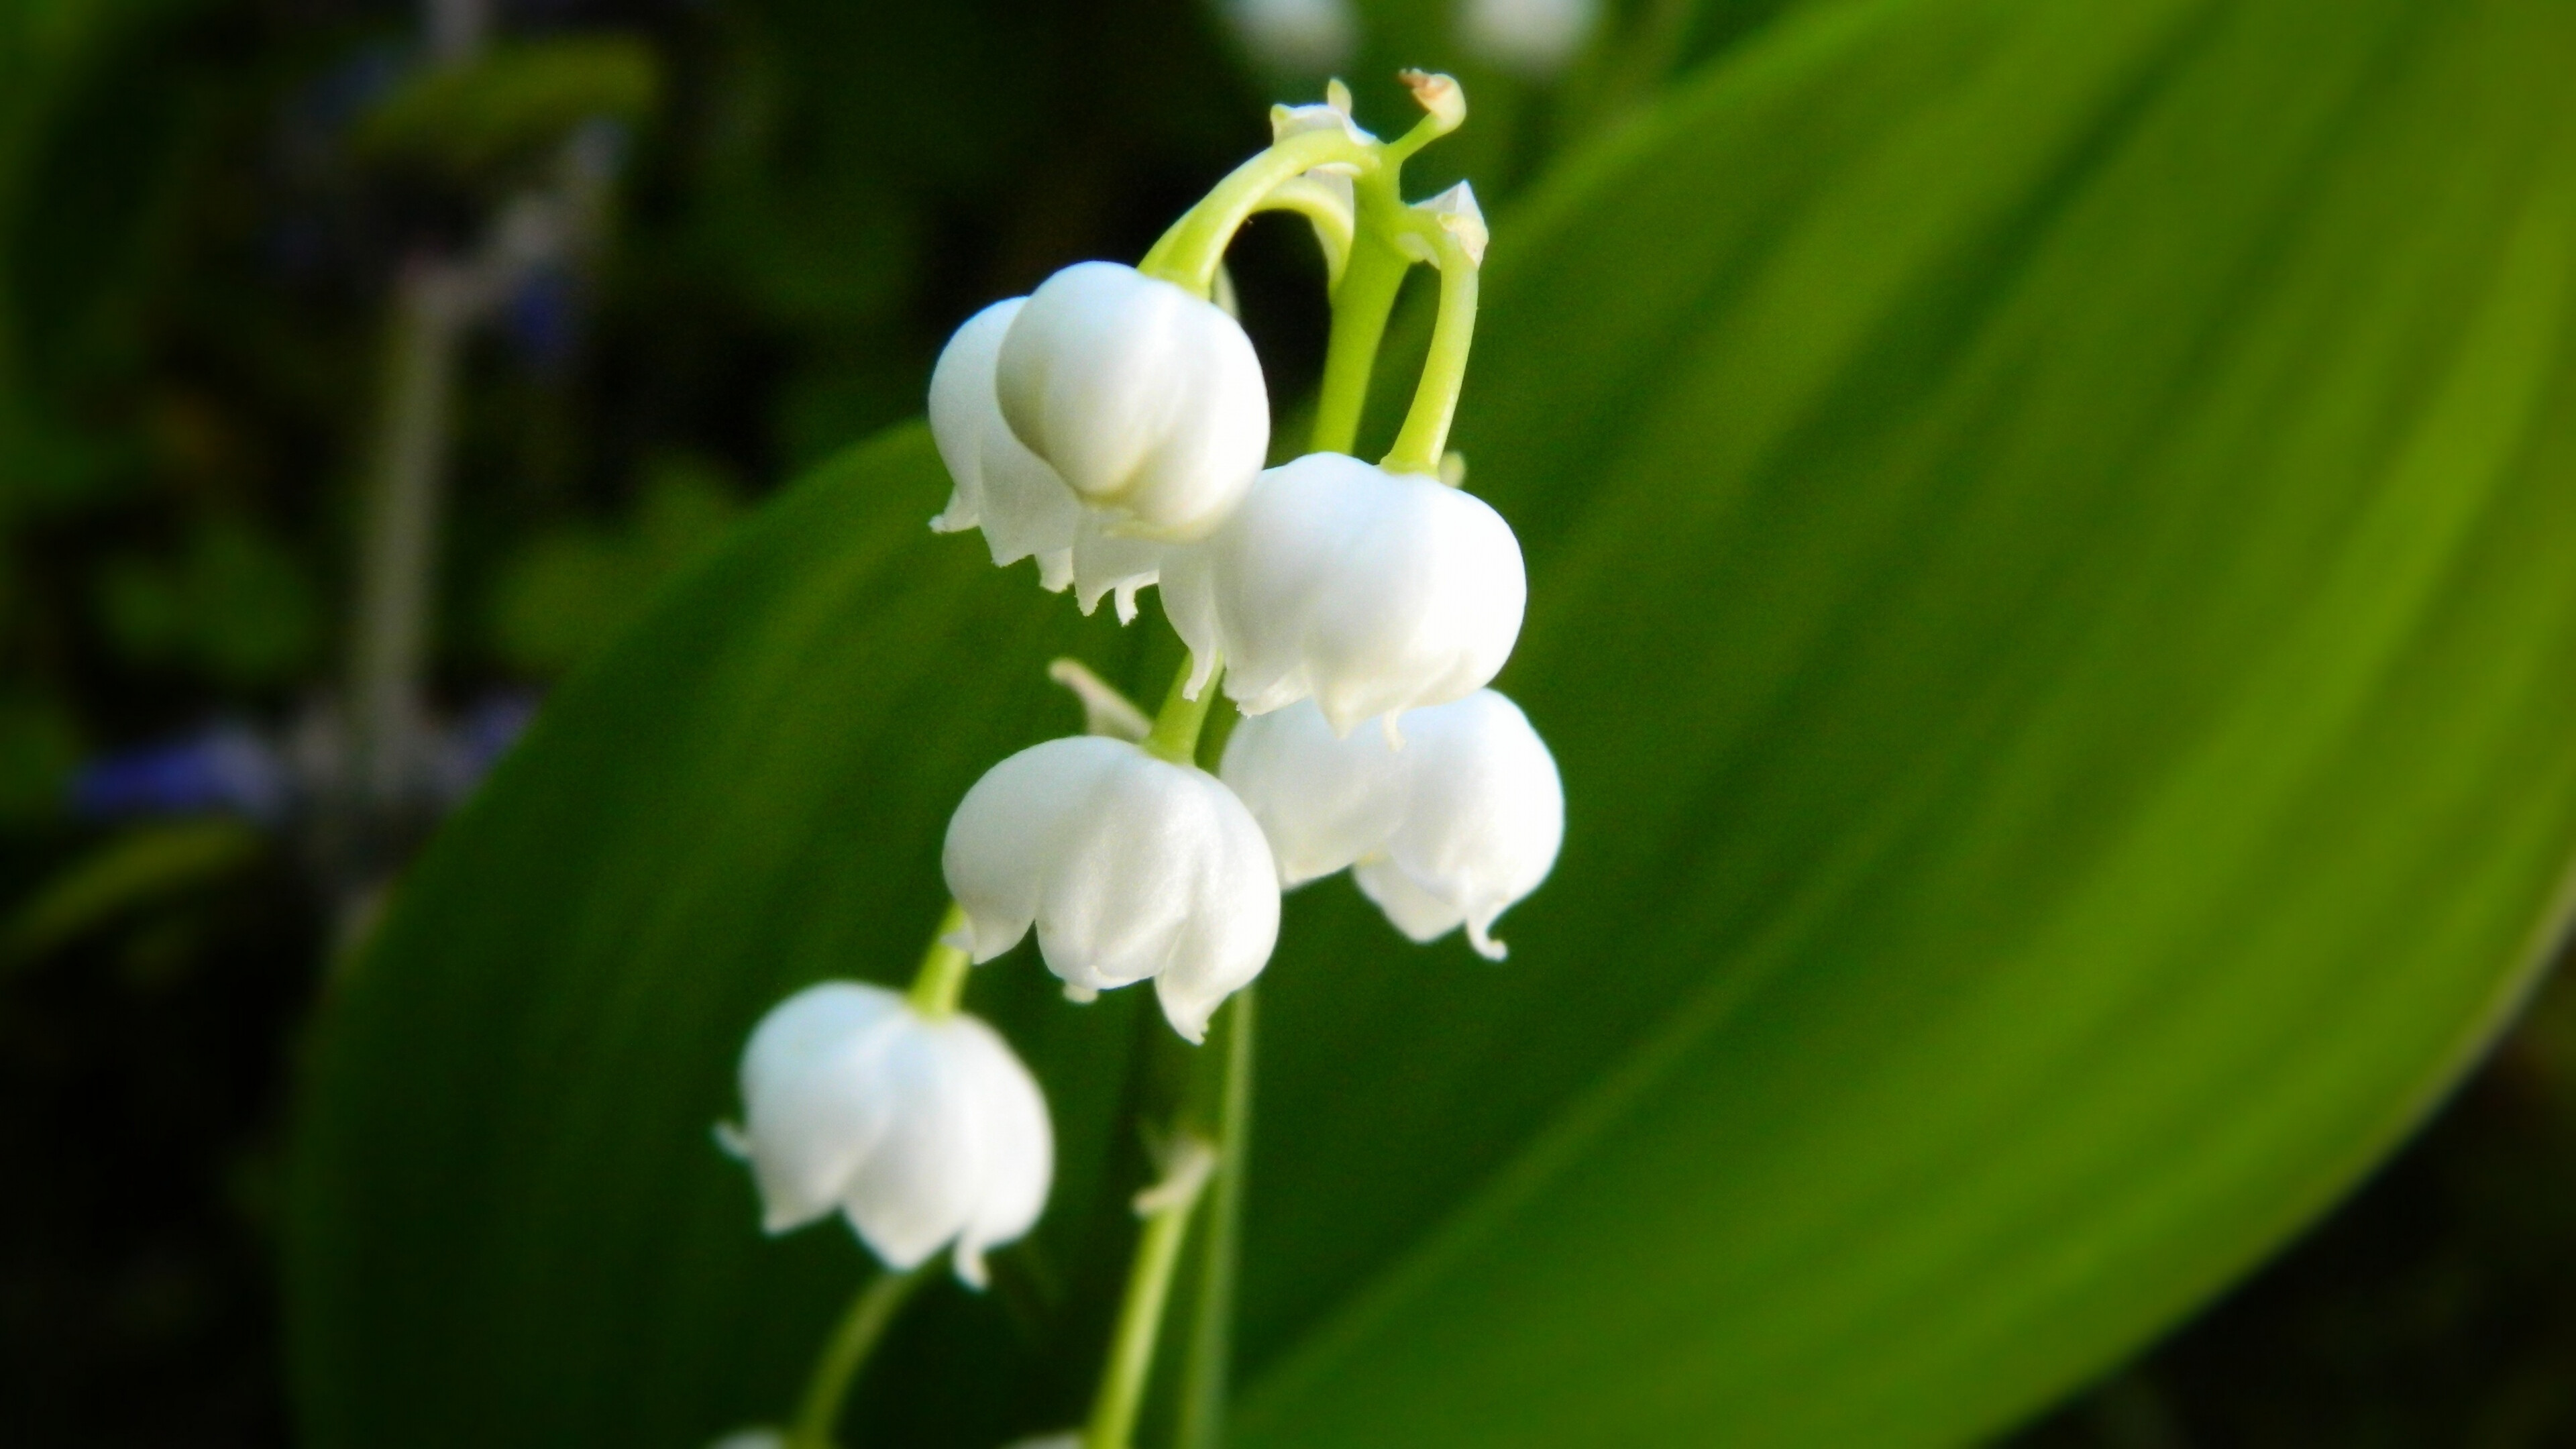 Lily of the Valley: A woodland flowering plant with sweetly scented, pendent, bell-shaped white flowers borne in sprays in spring. 3840x2160 4K Background.